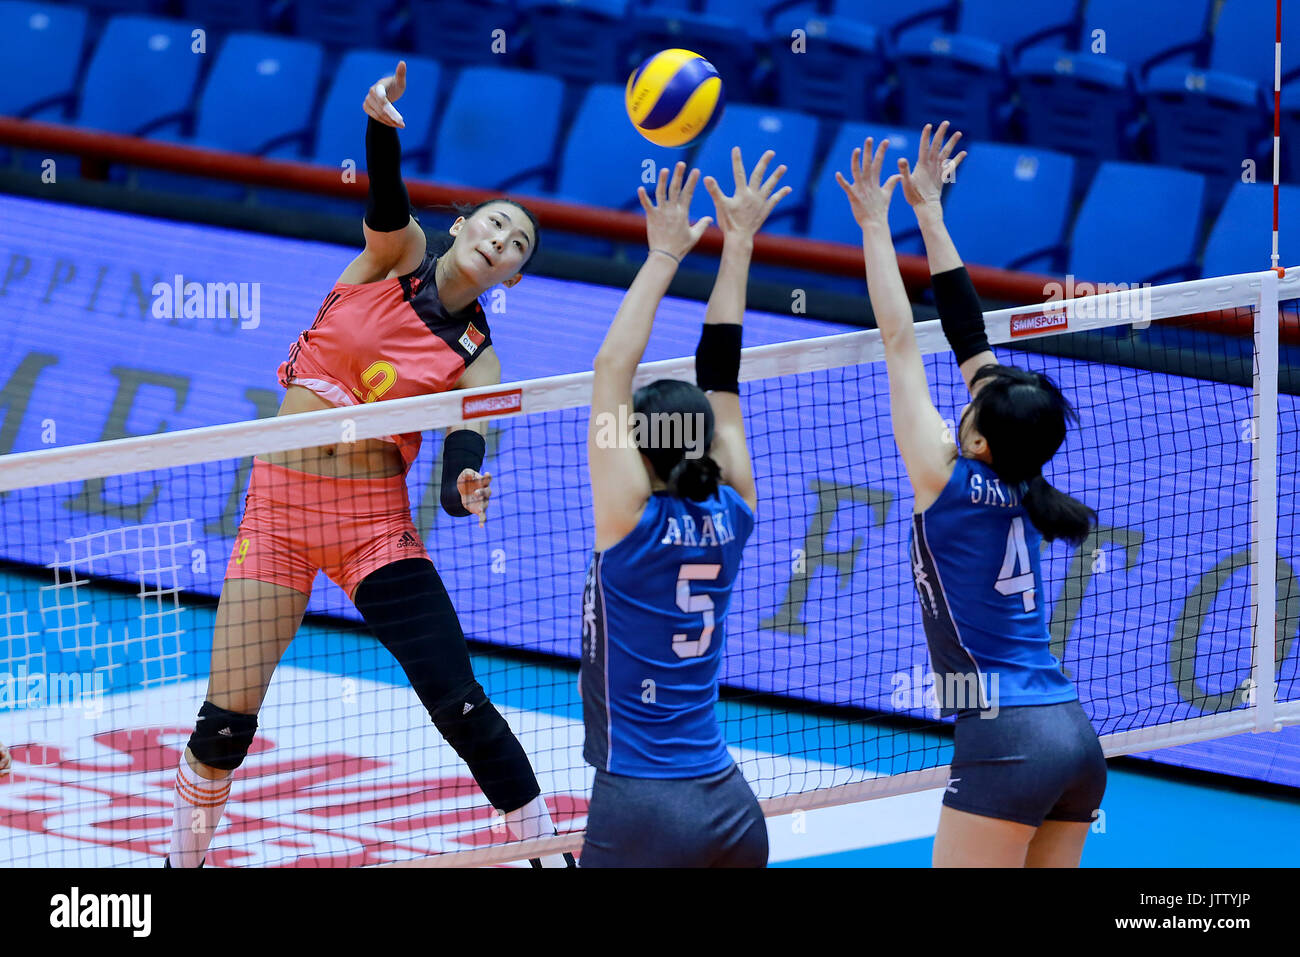 Laguna Province, Philippines. 10th Aug, 2017. Jin Ye of China (L) competes against Erika Araki (C) and Risa Shinnabe (R) of Japan during their preliminary round match in the 2017 Asian Women's Volleyball Championship in Laguna Province, the Philippines, Aug. 10, 2017. Japan won 3-0. Credit: Rouelle Umali/Xinhua/Alamy Live News Stock Photo